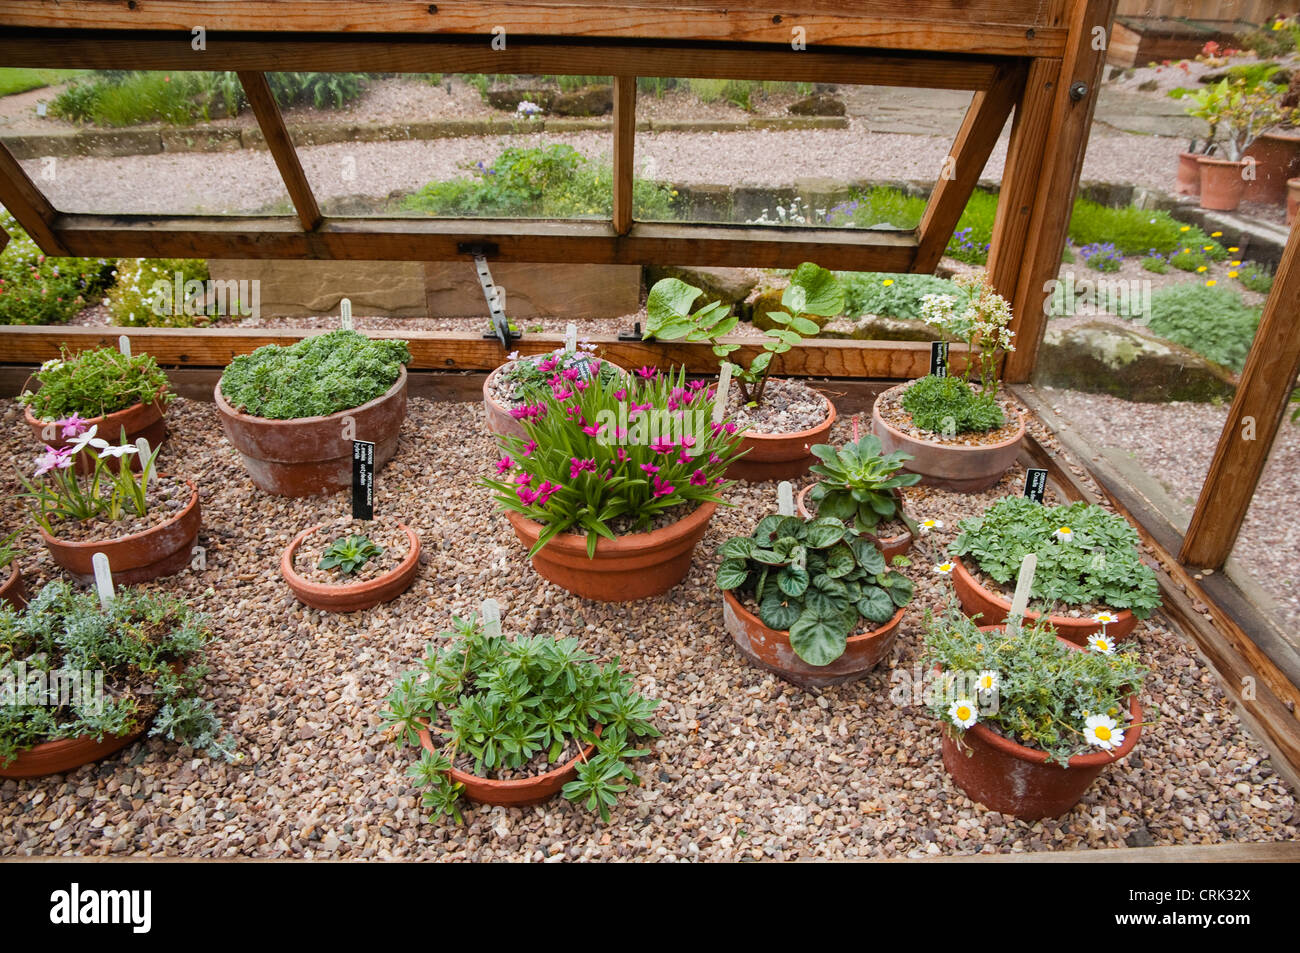 A variety of Alpine plants growing in pots on gravel covered staging within a traditional wooden greenhouse with opening lights. Stock Photo